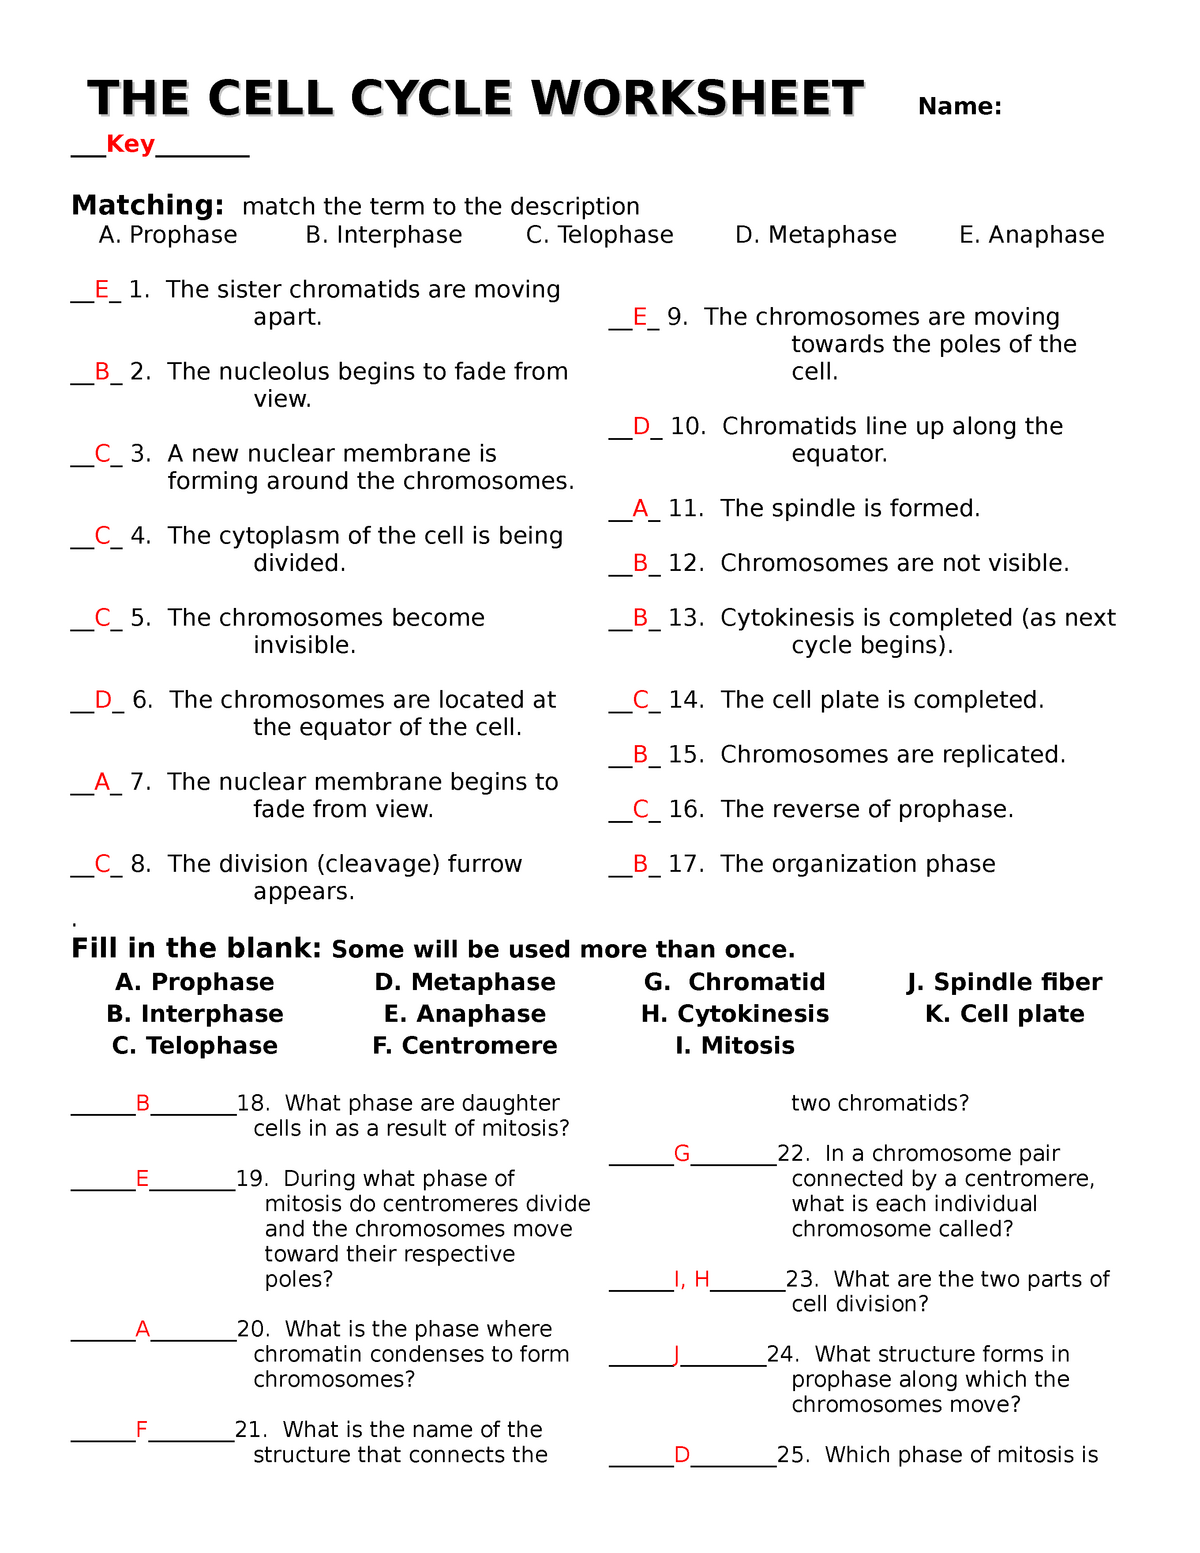 The-cell-cycle-worksheet with answers - BIOG-24 - Explorations in For Cell Cycle Worksheet Answer Key